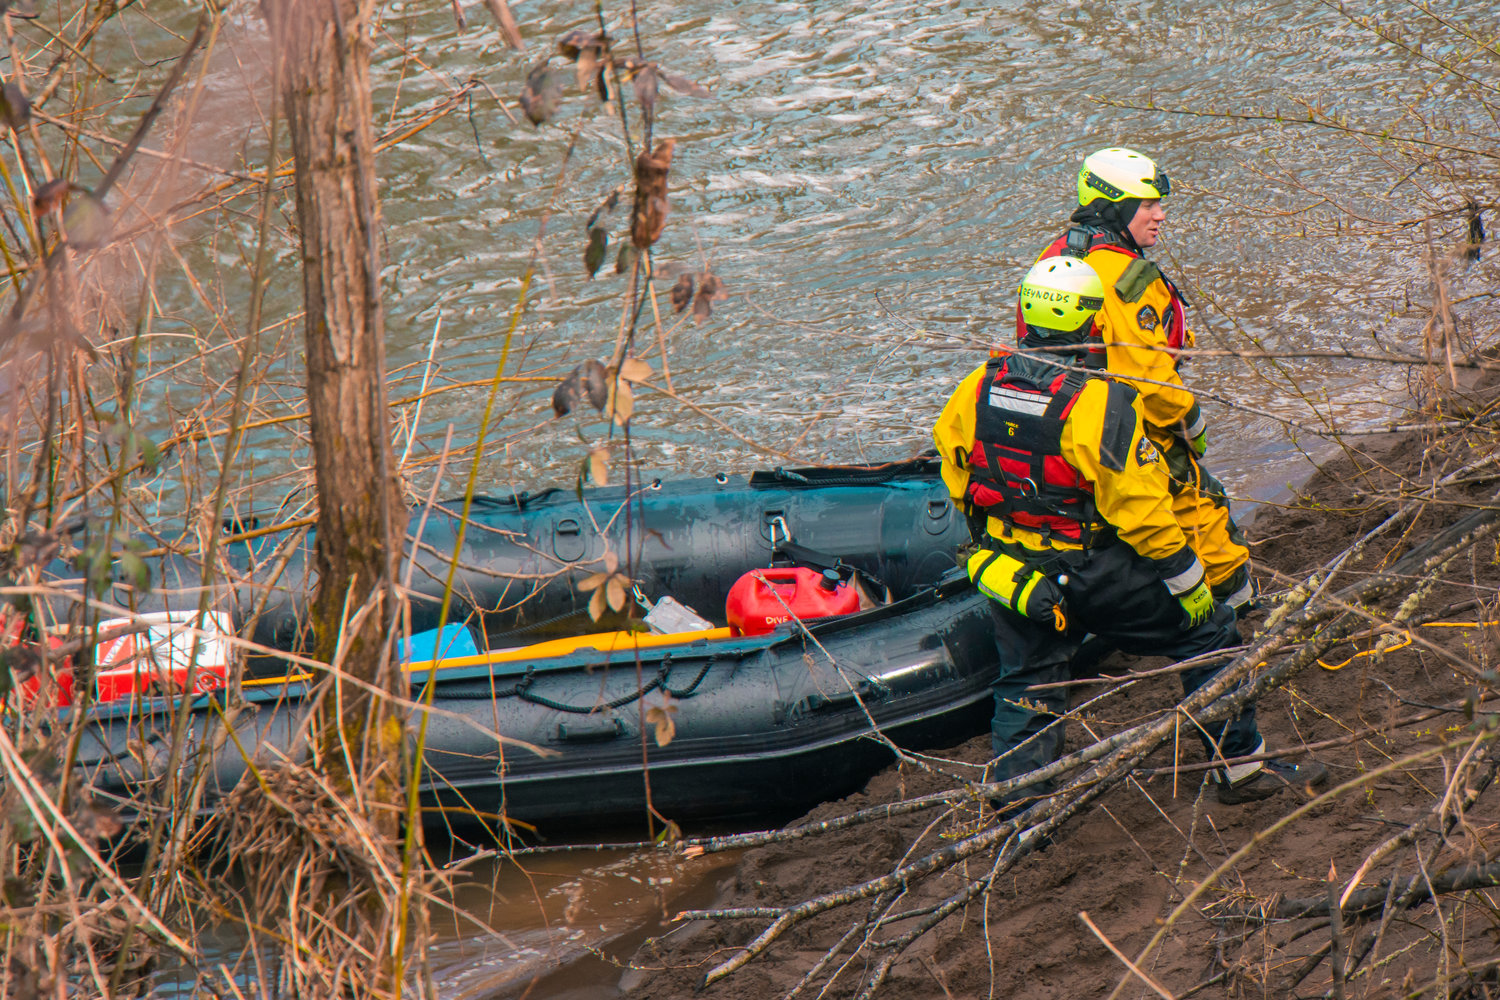 FILE PHOTO — Members of the Thurston County Sheriff Dive and Rescue crew stand on the bank of the Chehalis River during a search for missing teen Zach Hines-Rager in Adna. The Centralia teen died after jumping into the cold water.